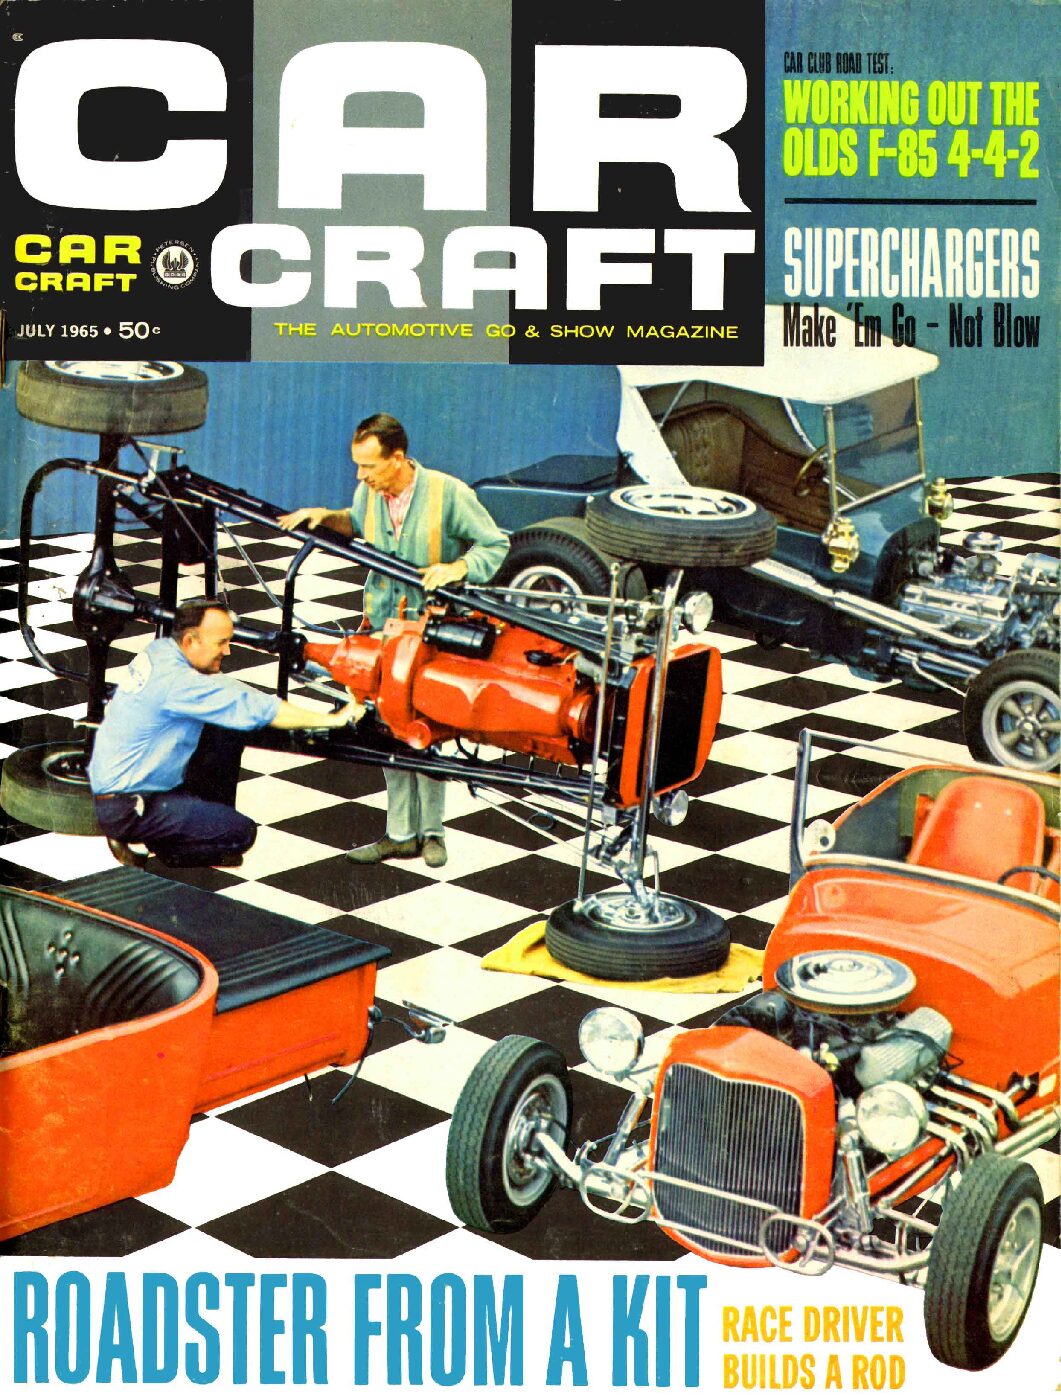 CC July 1965 - Cover and Table of Contents